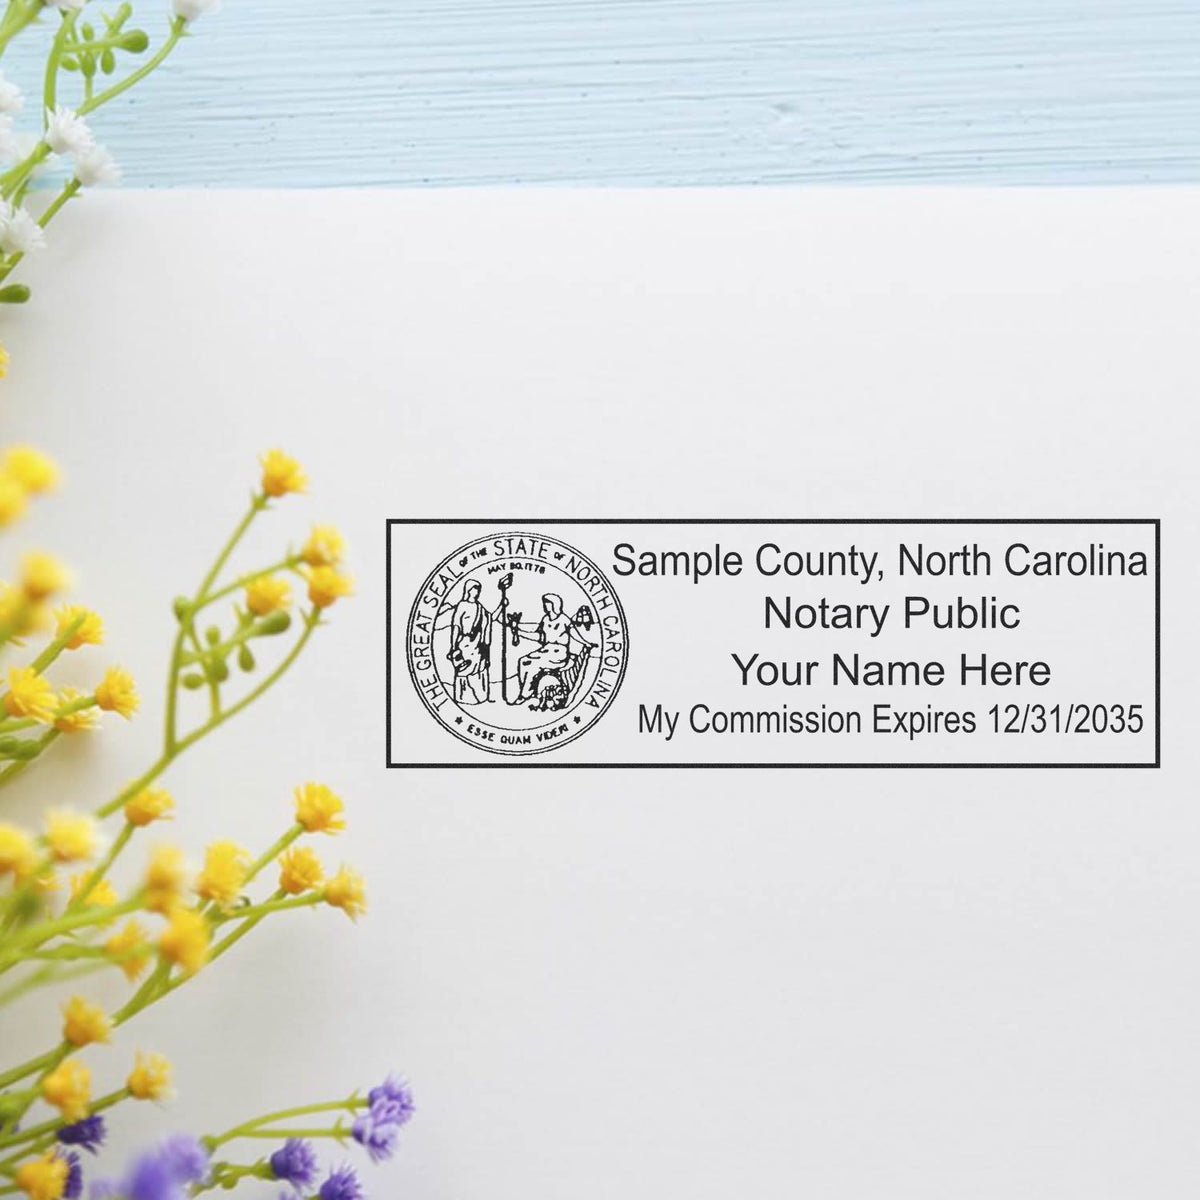 A lifestyle photo showing a stamped image of the Heavy-Duty North Carolina Rectangular Notary Stamp on a piece of paper